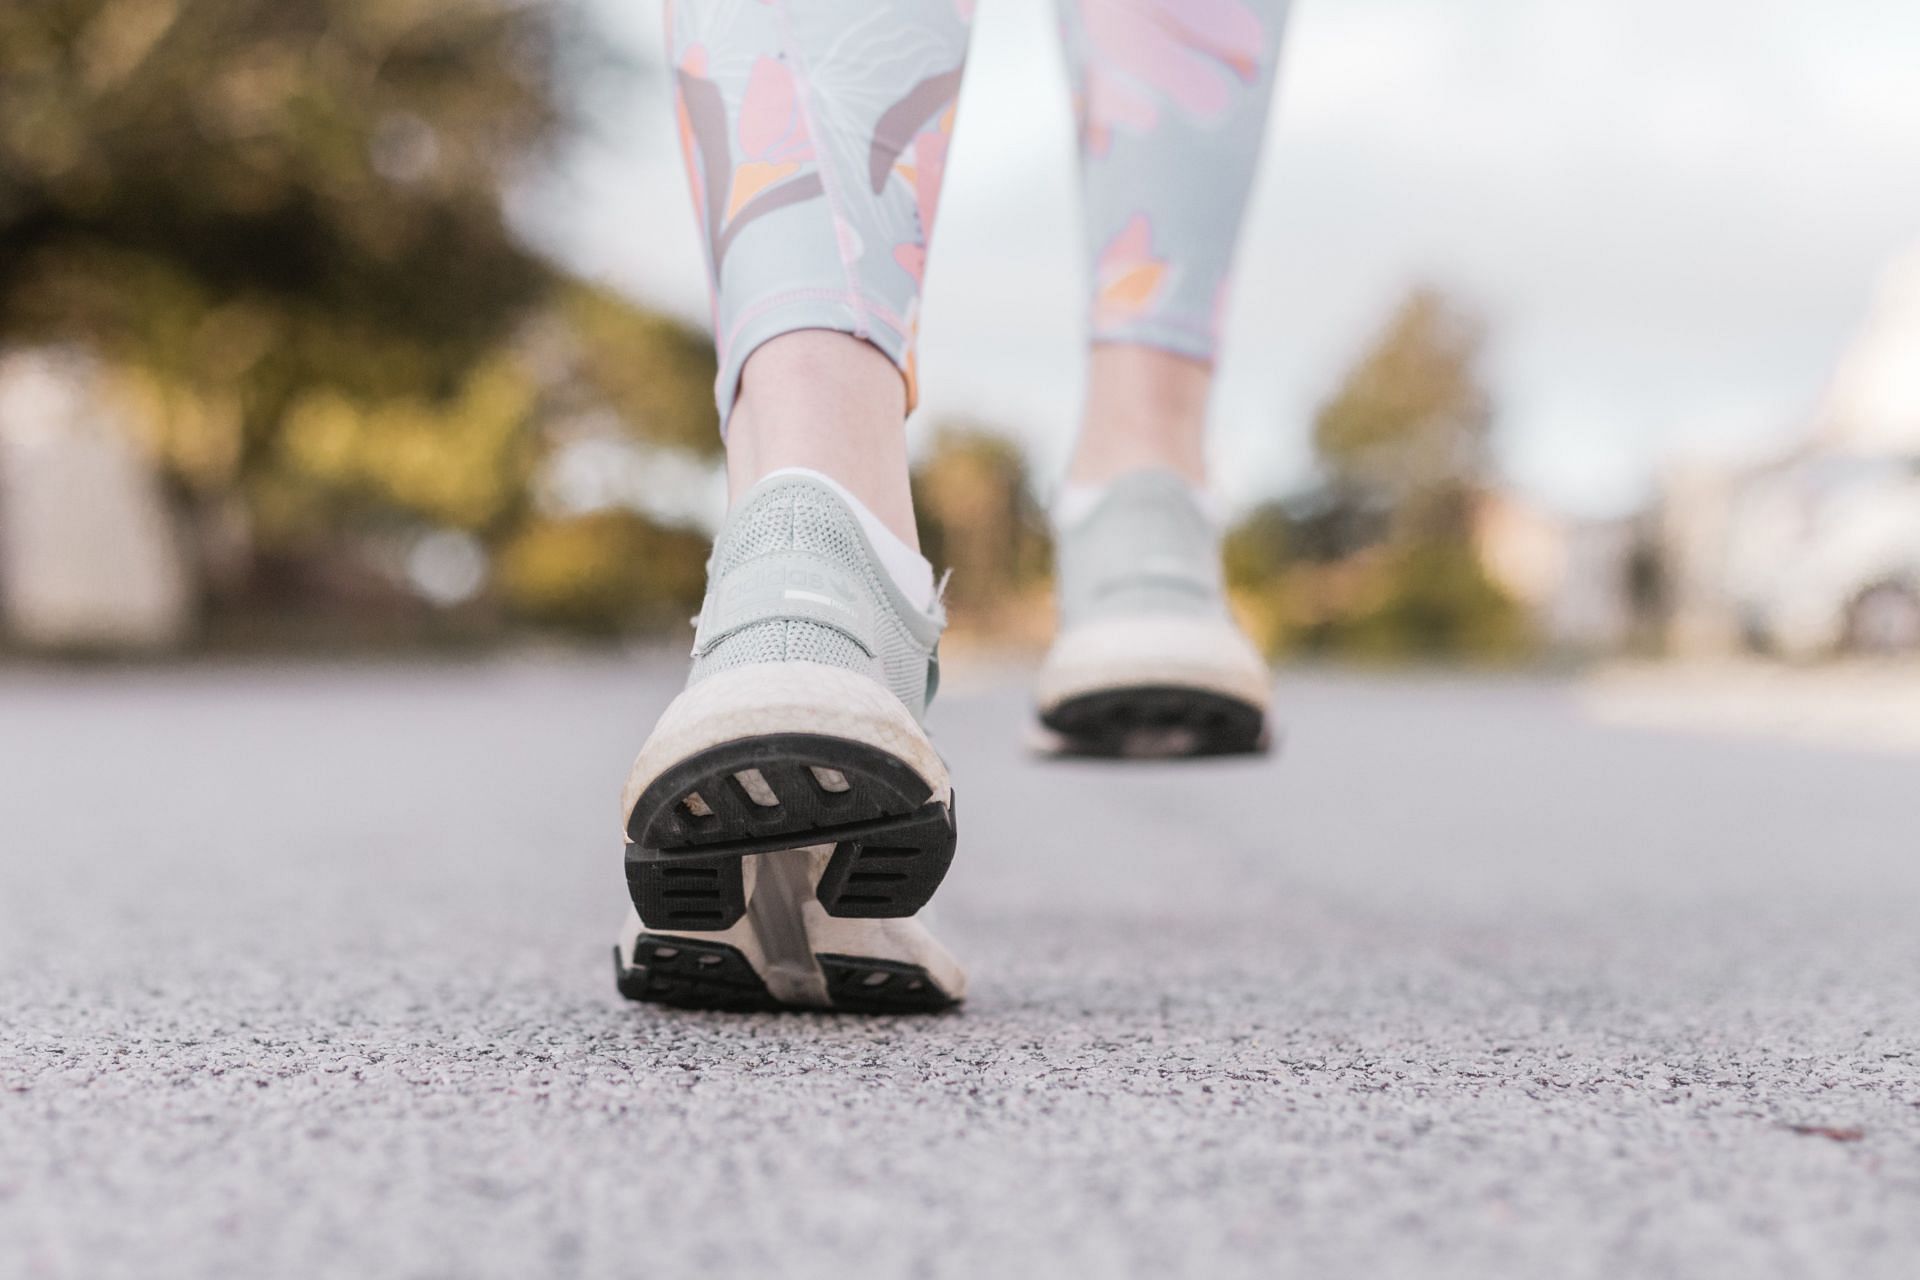 Walking is an excellent form of aerobic exercise. (Image via Unsplash/Sincerely Media)